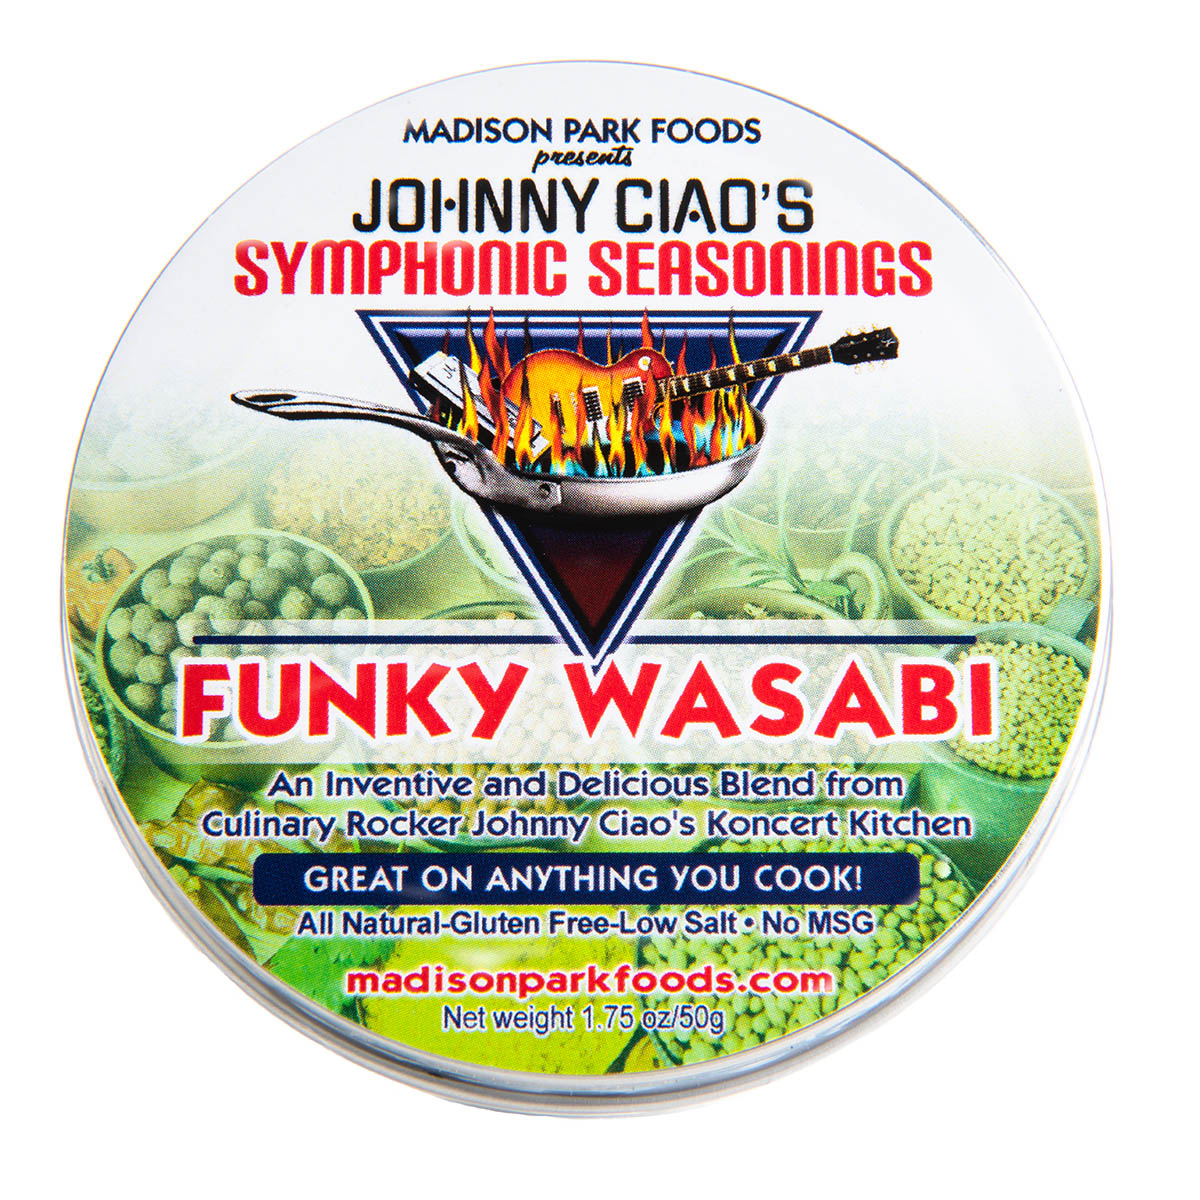 Johnny Ciao's Funky Wasabi - Madison Park Foods